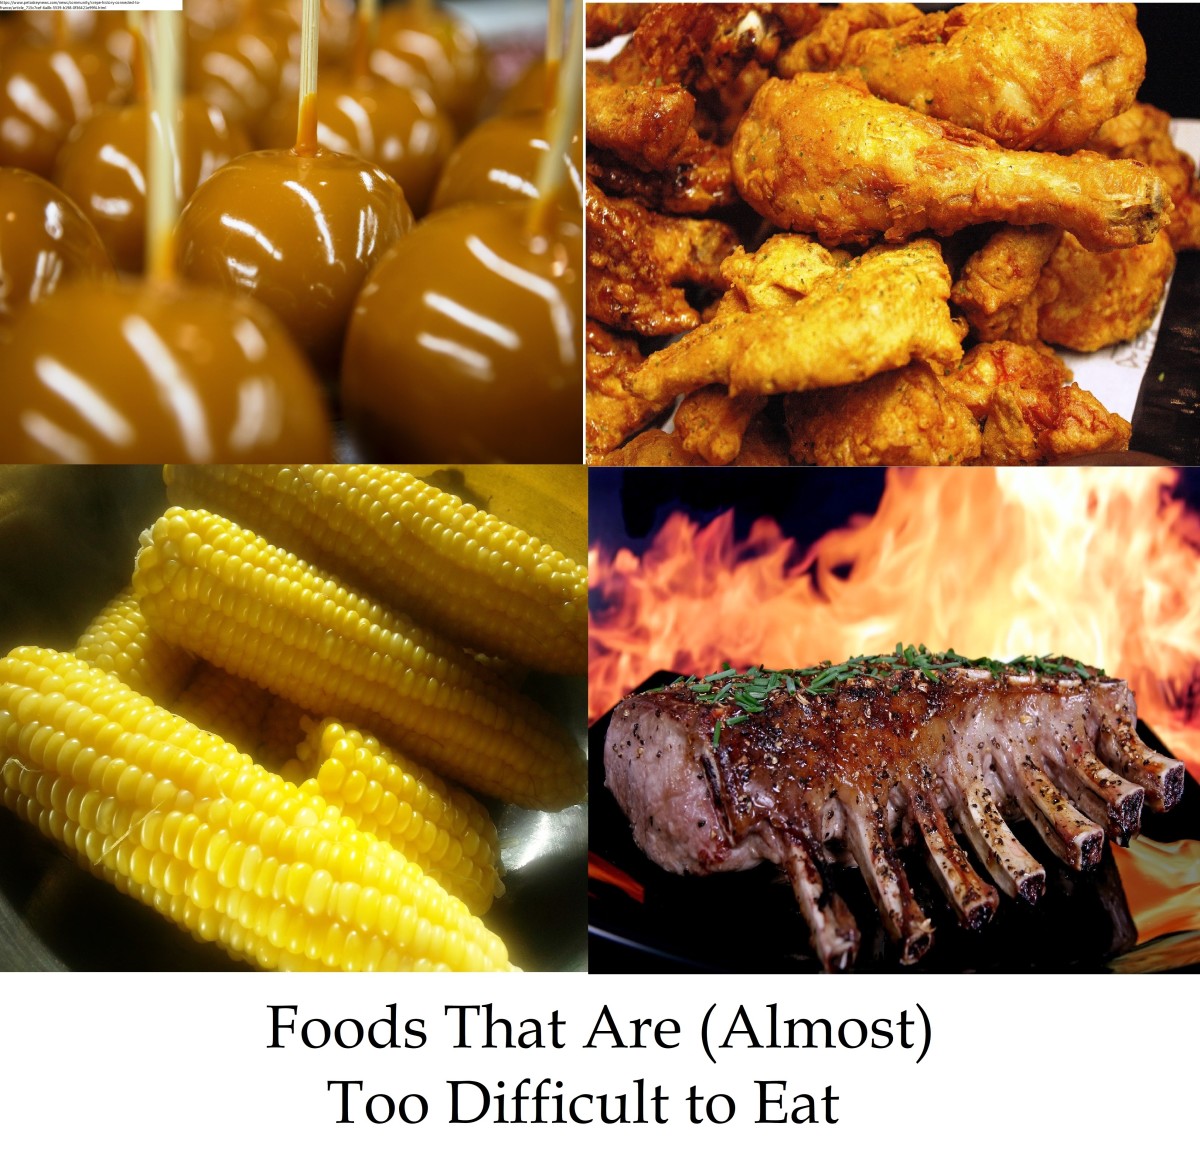 8-more-foods-that-are-almost-too-difficult-to-eat